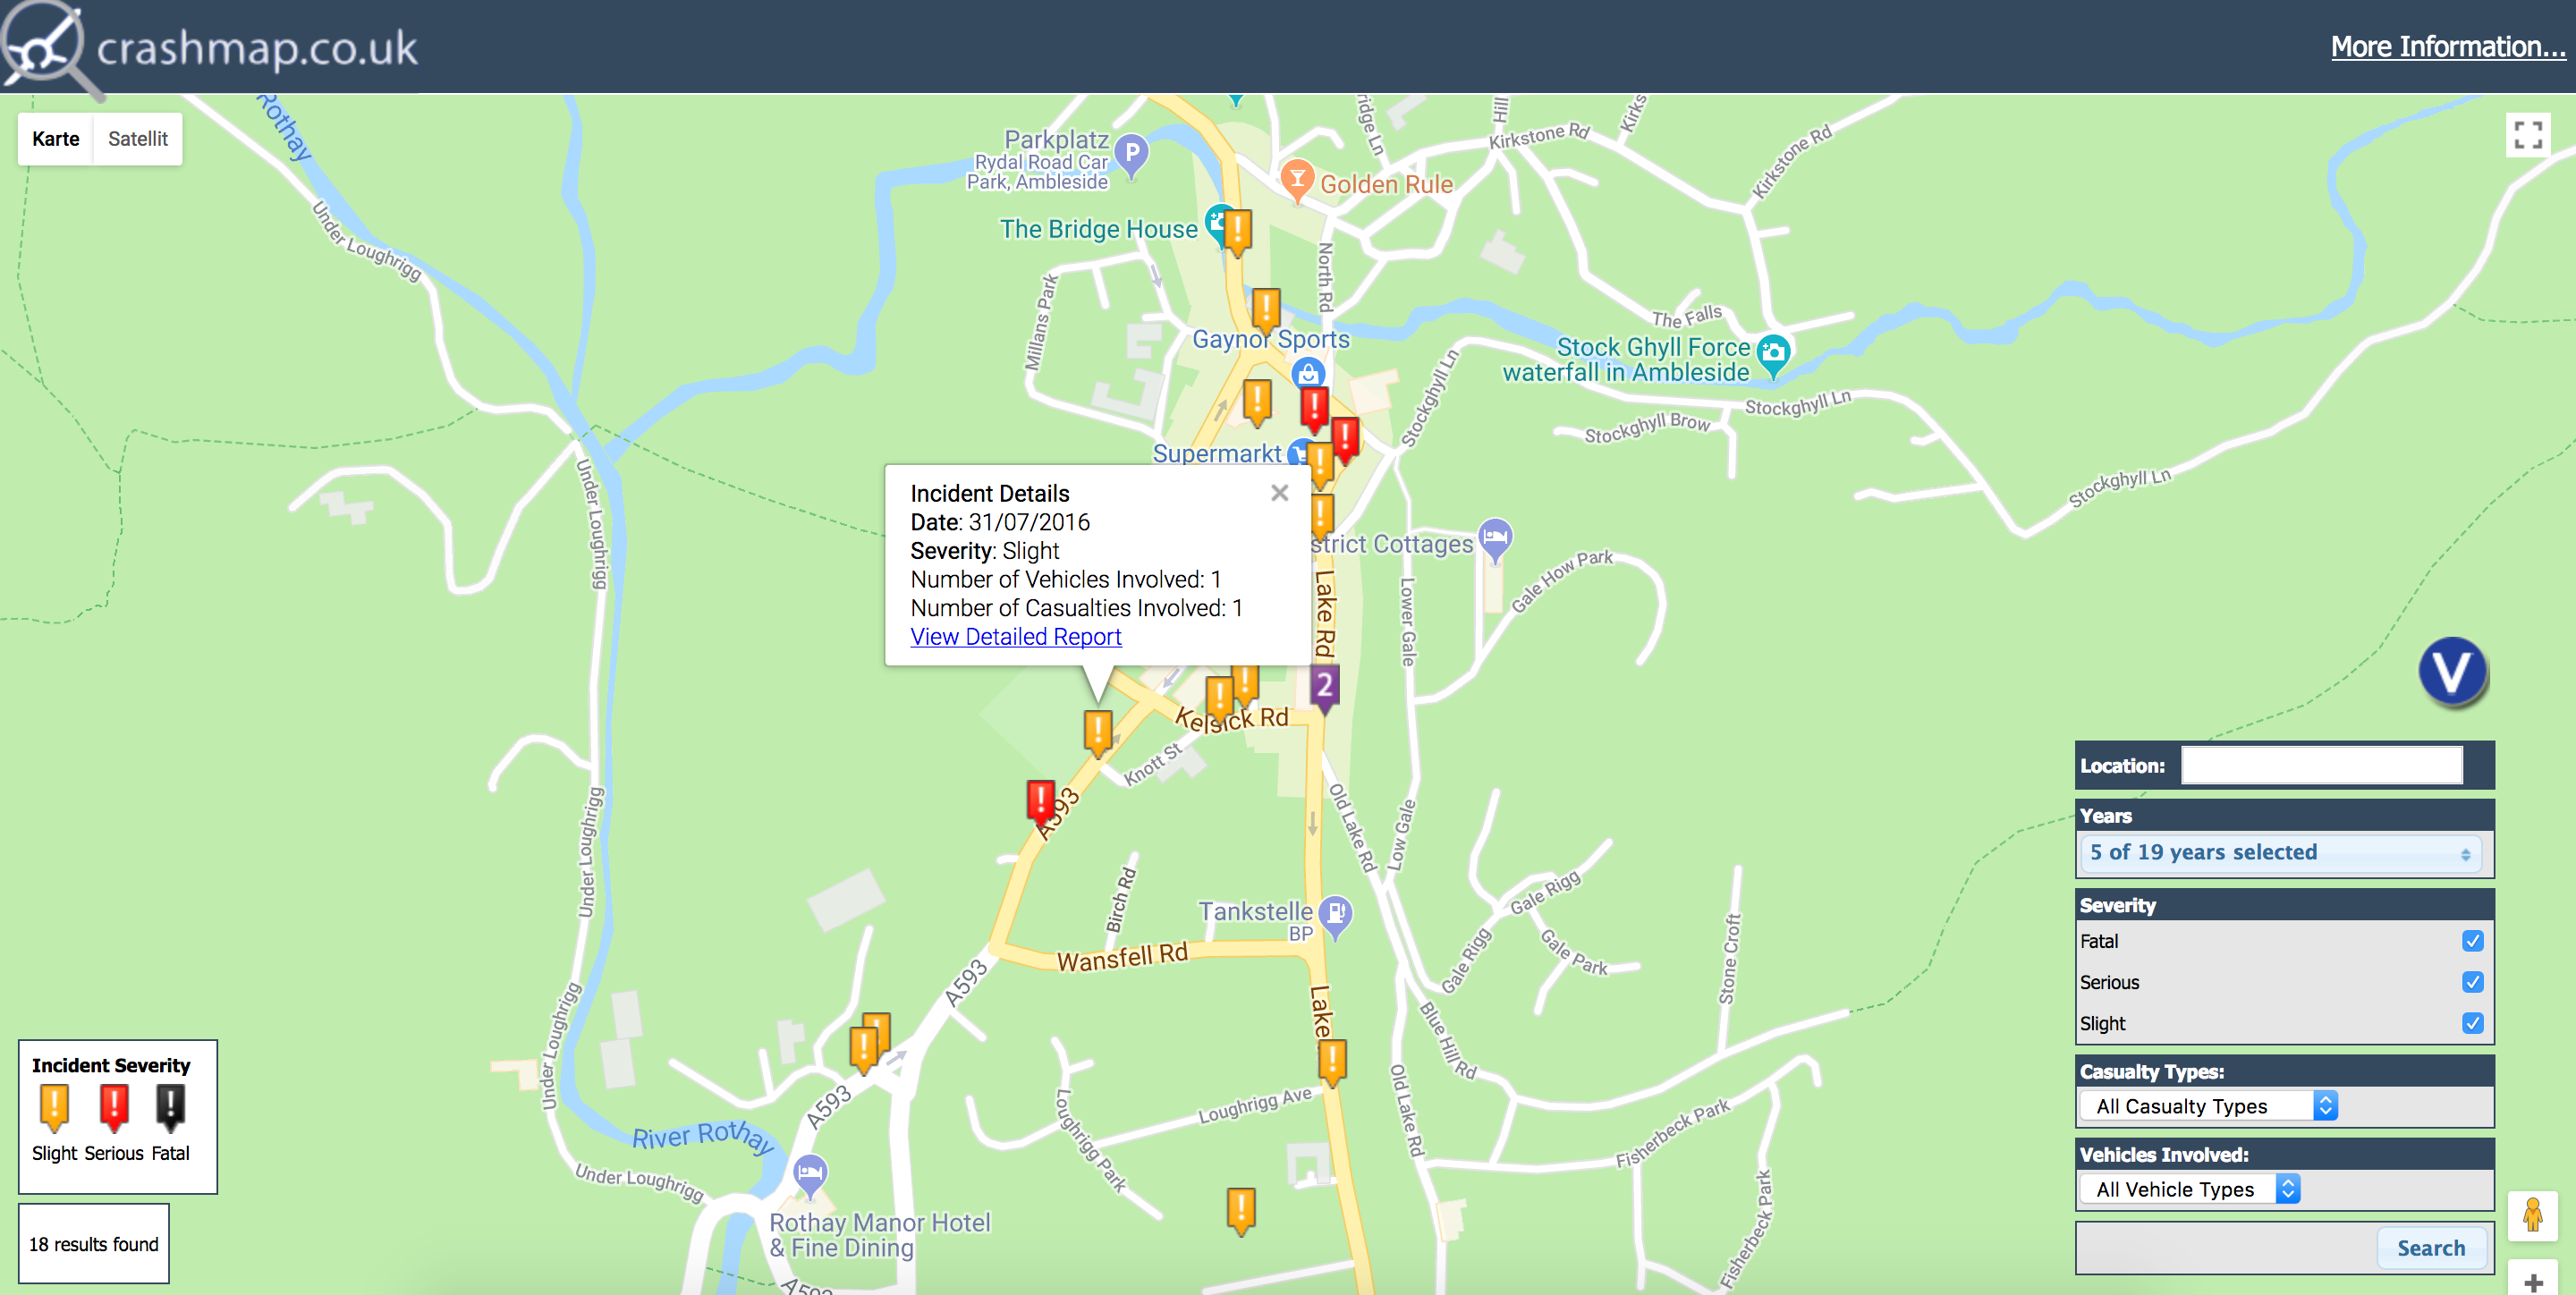 CrashMap, which uses government data to map road accidents in the UK